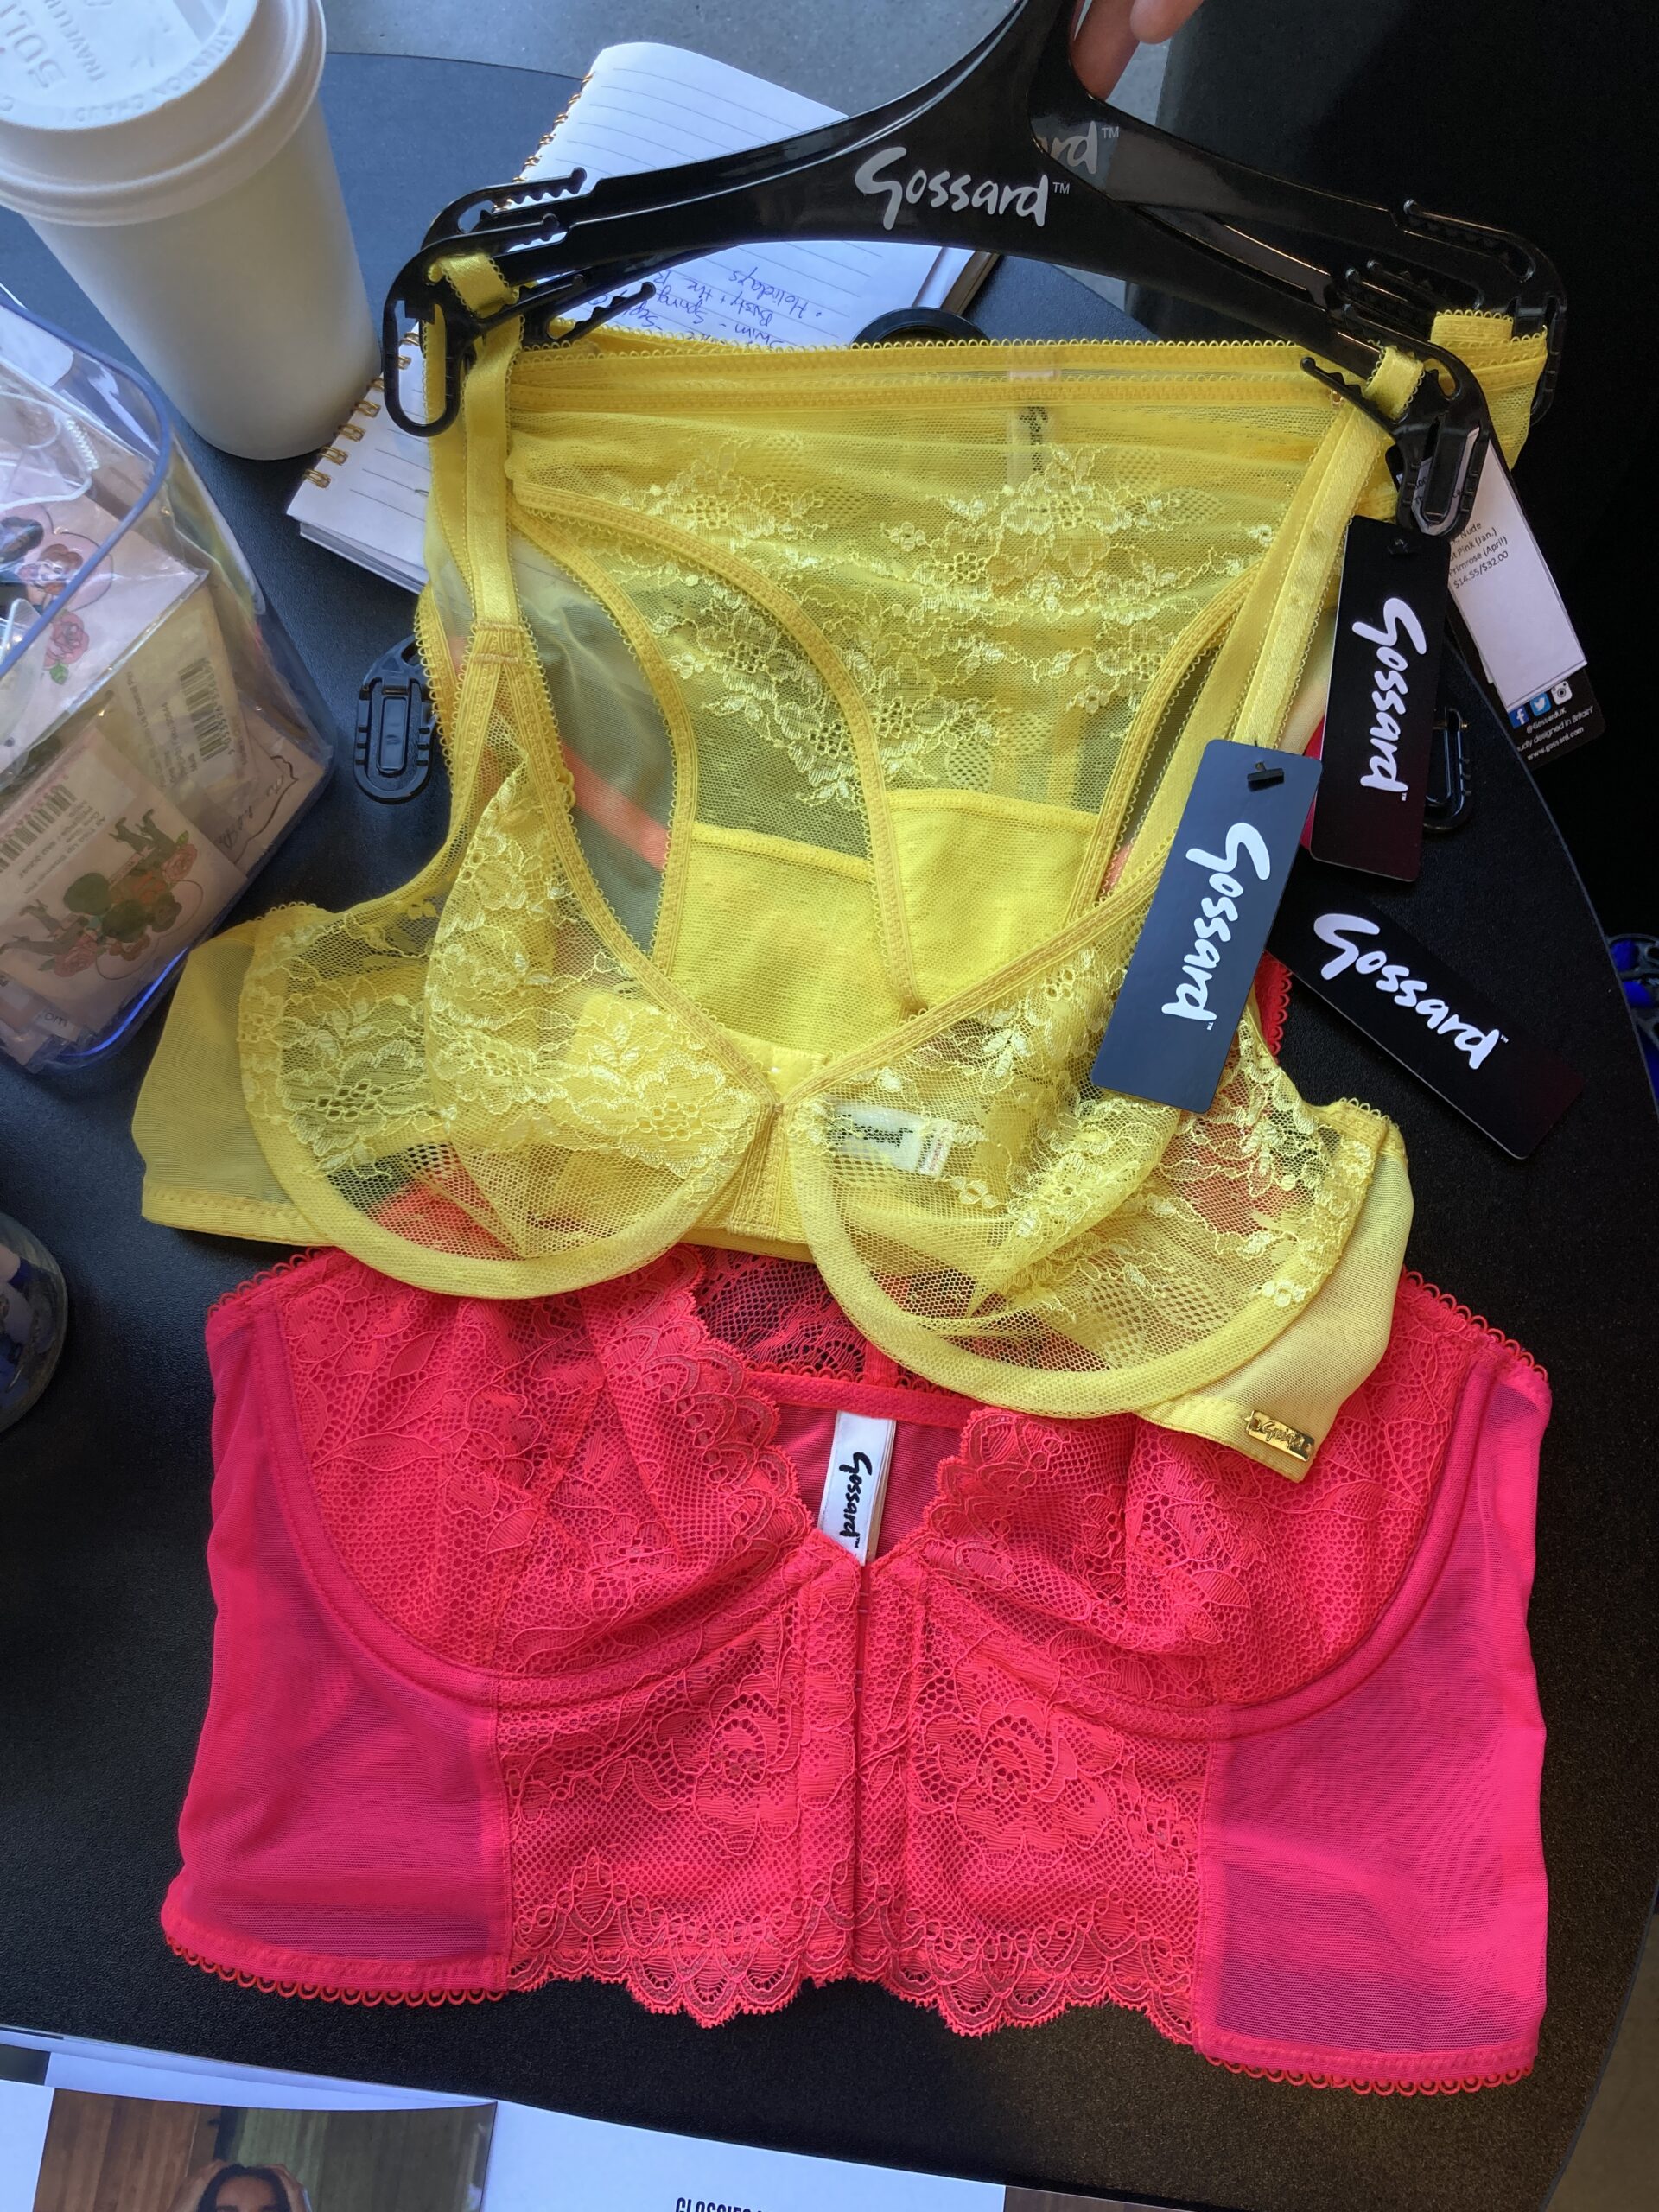 Gossard Glossies lace lingerie set in primrose yellow